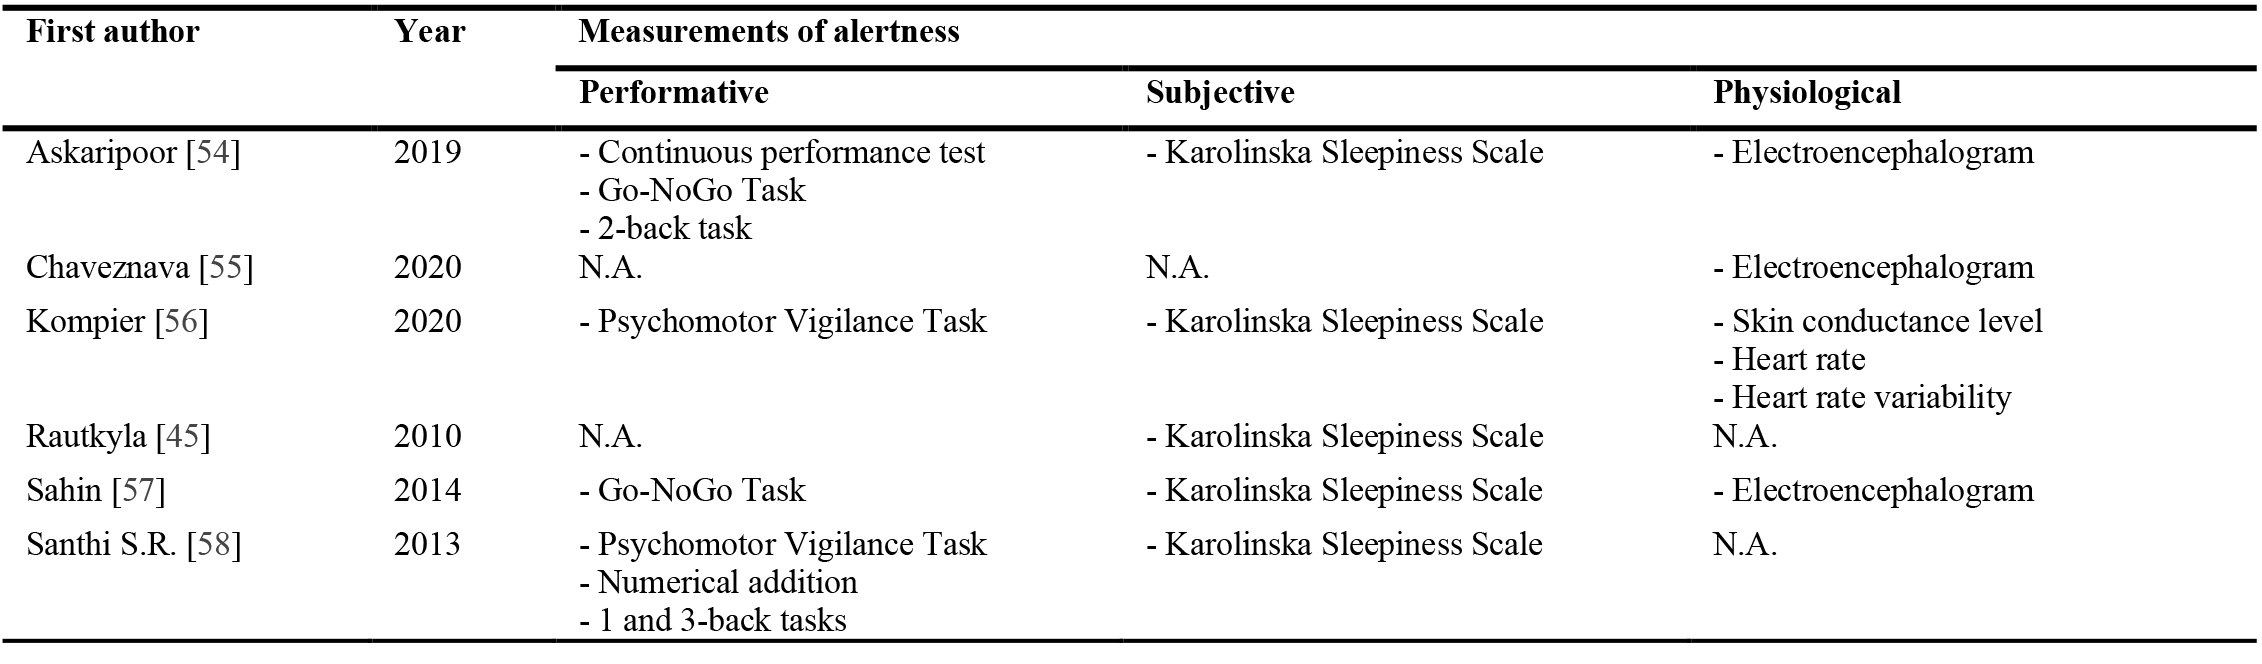 Studies that investigate the impact of CCT. Measurements of alertness: performative, subjective and physiological indicators.